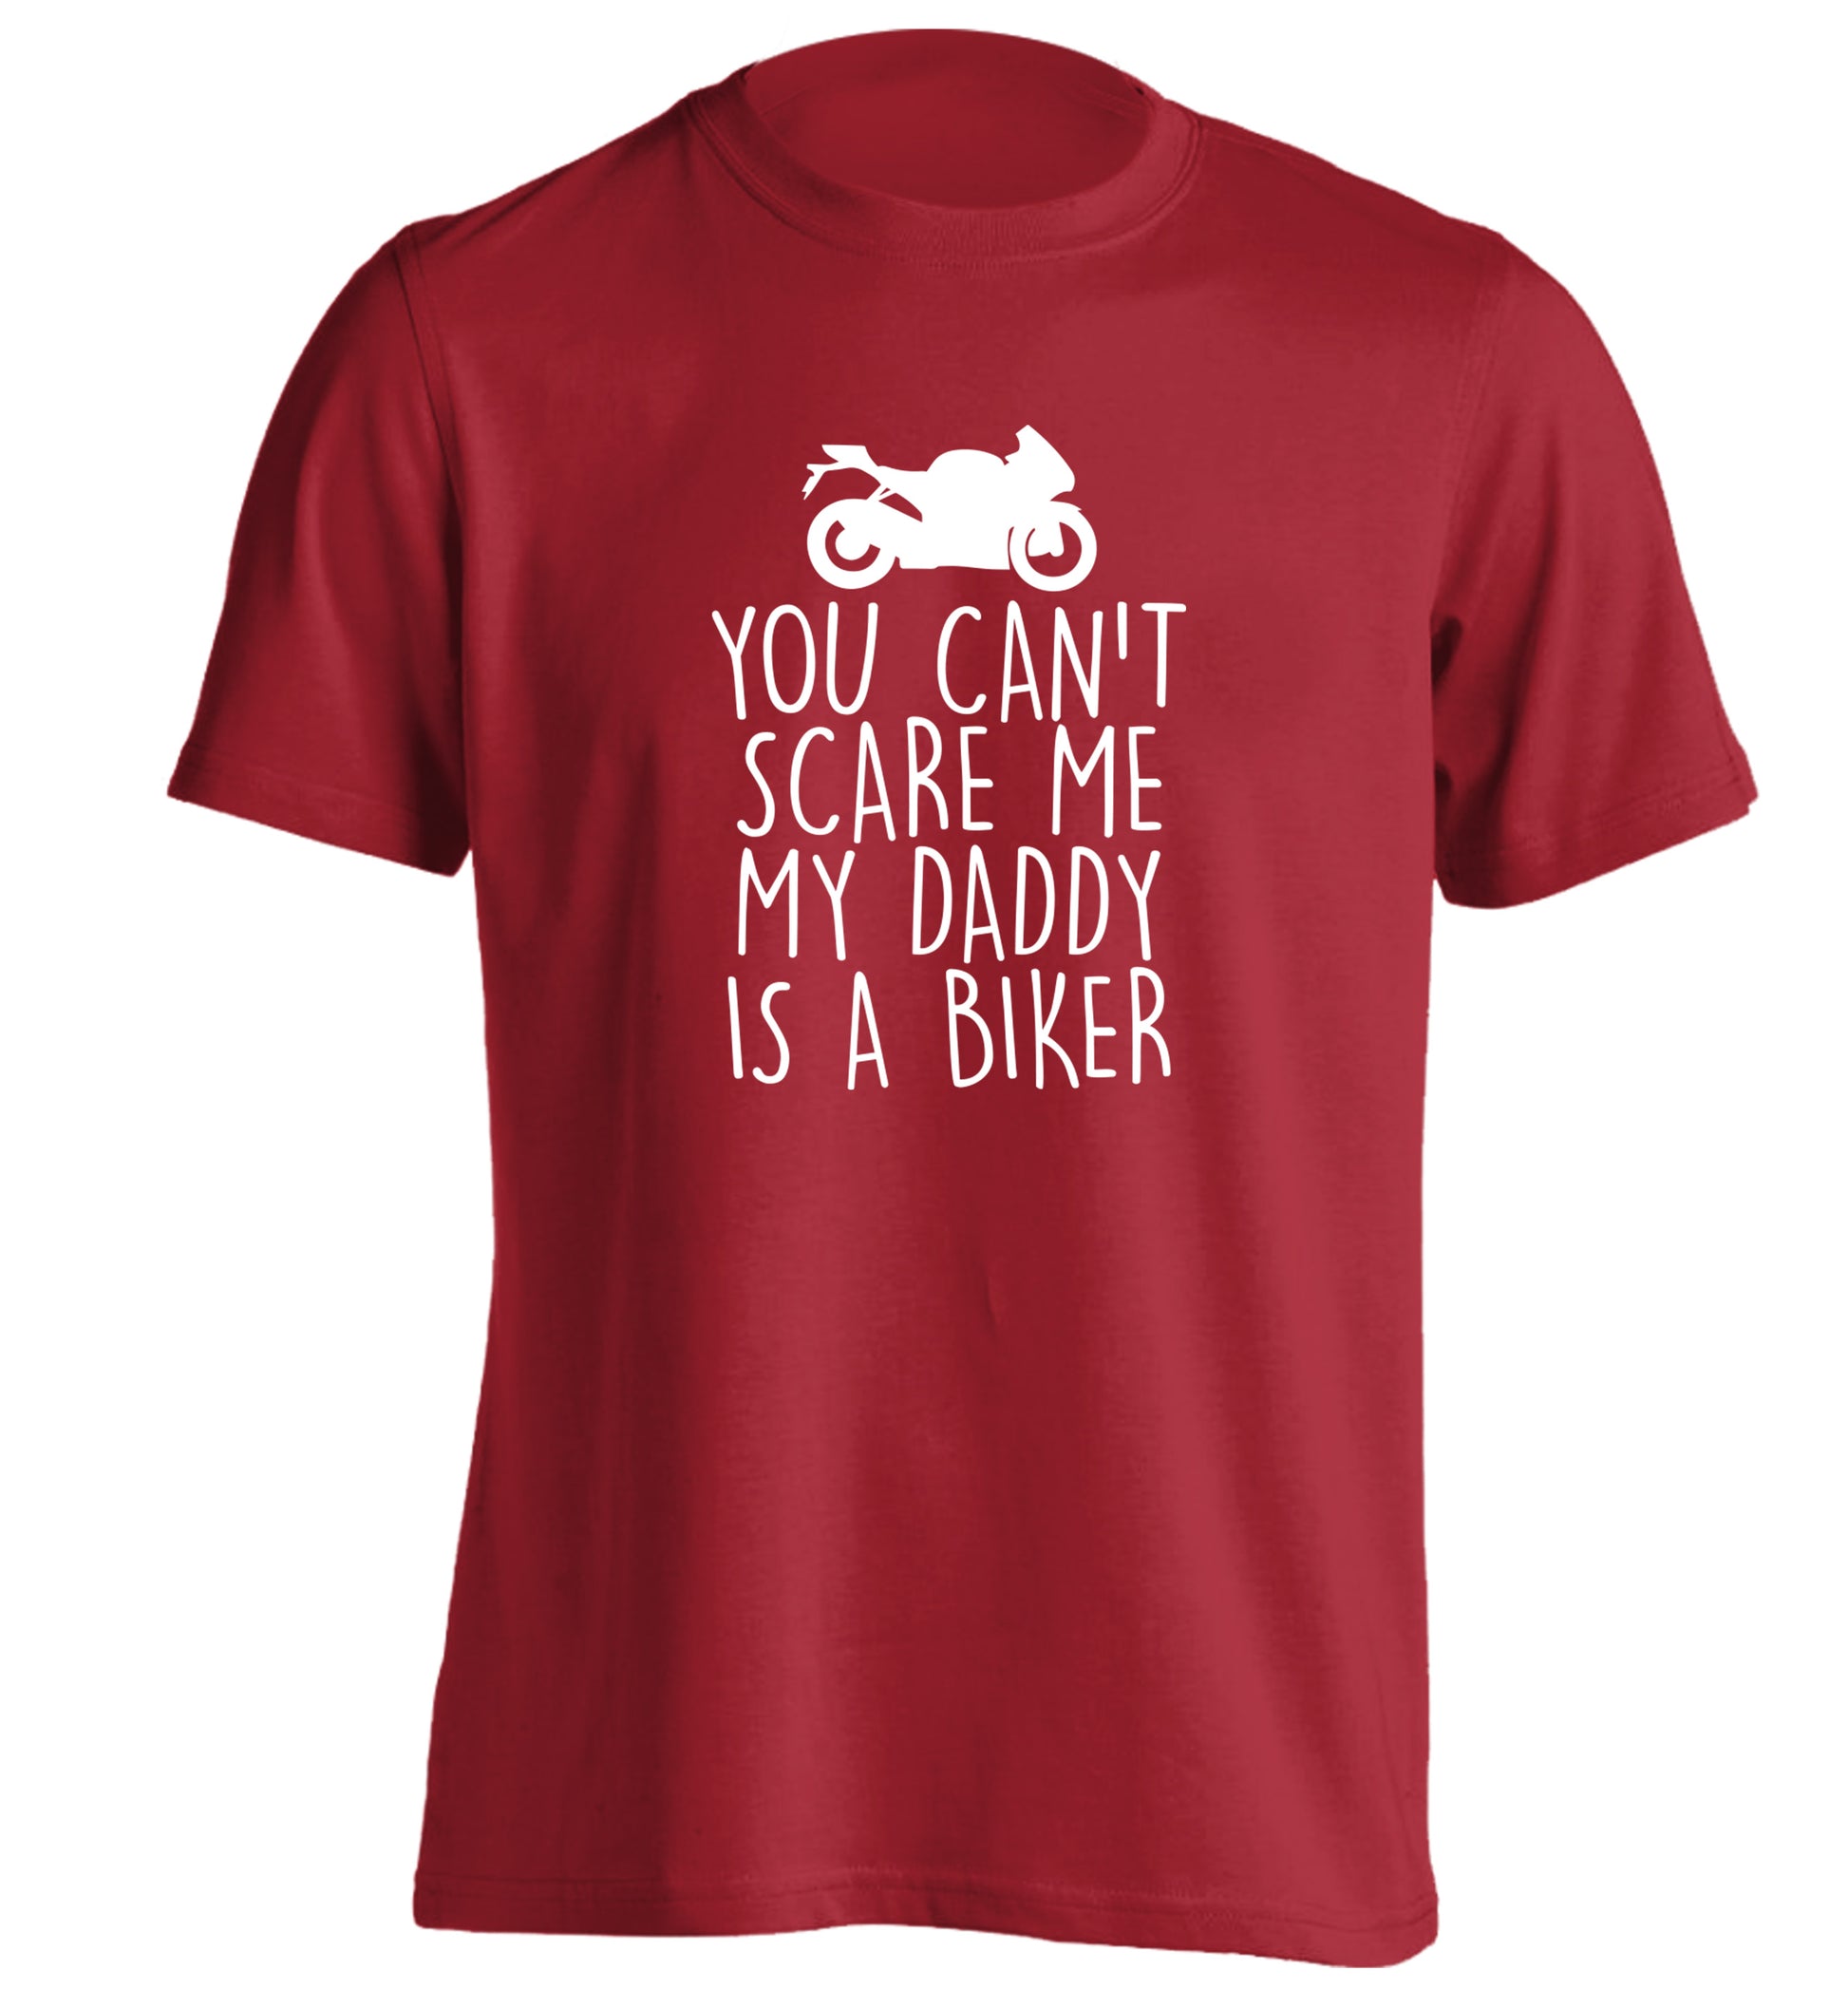 You can't scare me my daddy is a biker adults unisex red Tshirt 2XL